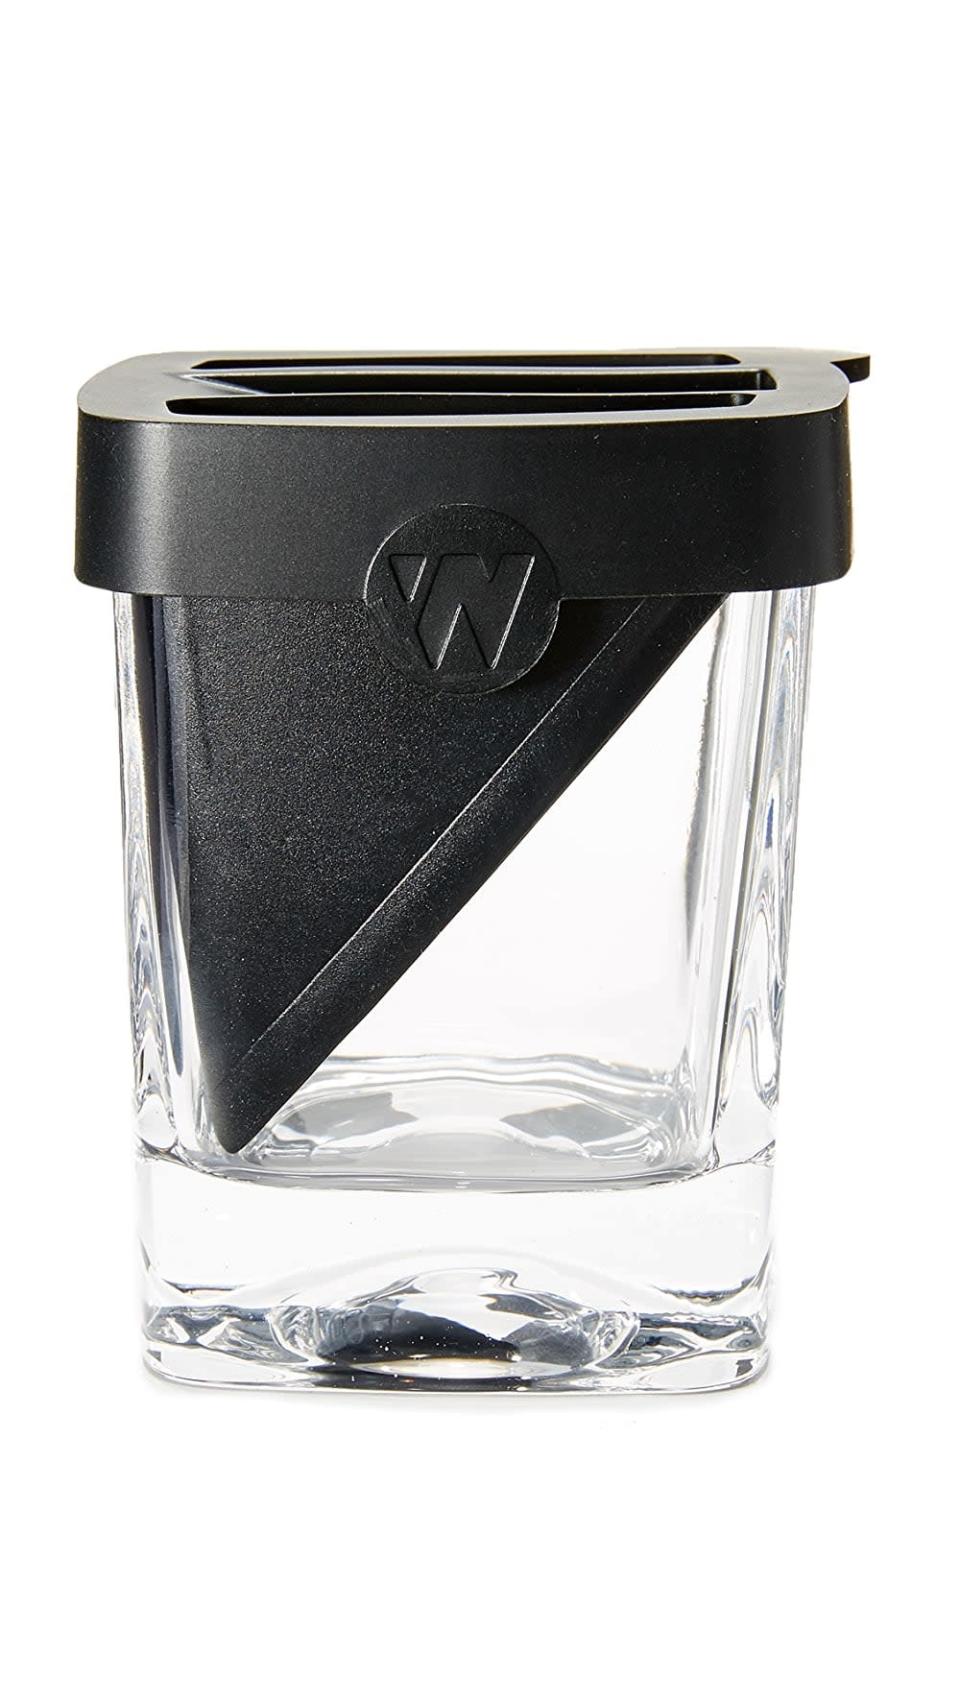 <p>This <span>Corkcicle Whiskey Wedge</span> ($25) is a must-have for all whiskey lovers. The ice will melt more slowly than usual, and the glass is freezer safe, so you can make the drink super cold without watering it down. It's also dishwasher safe, which is always a plus.</p>